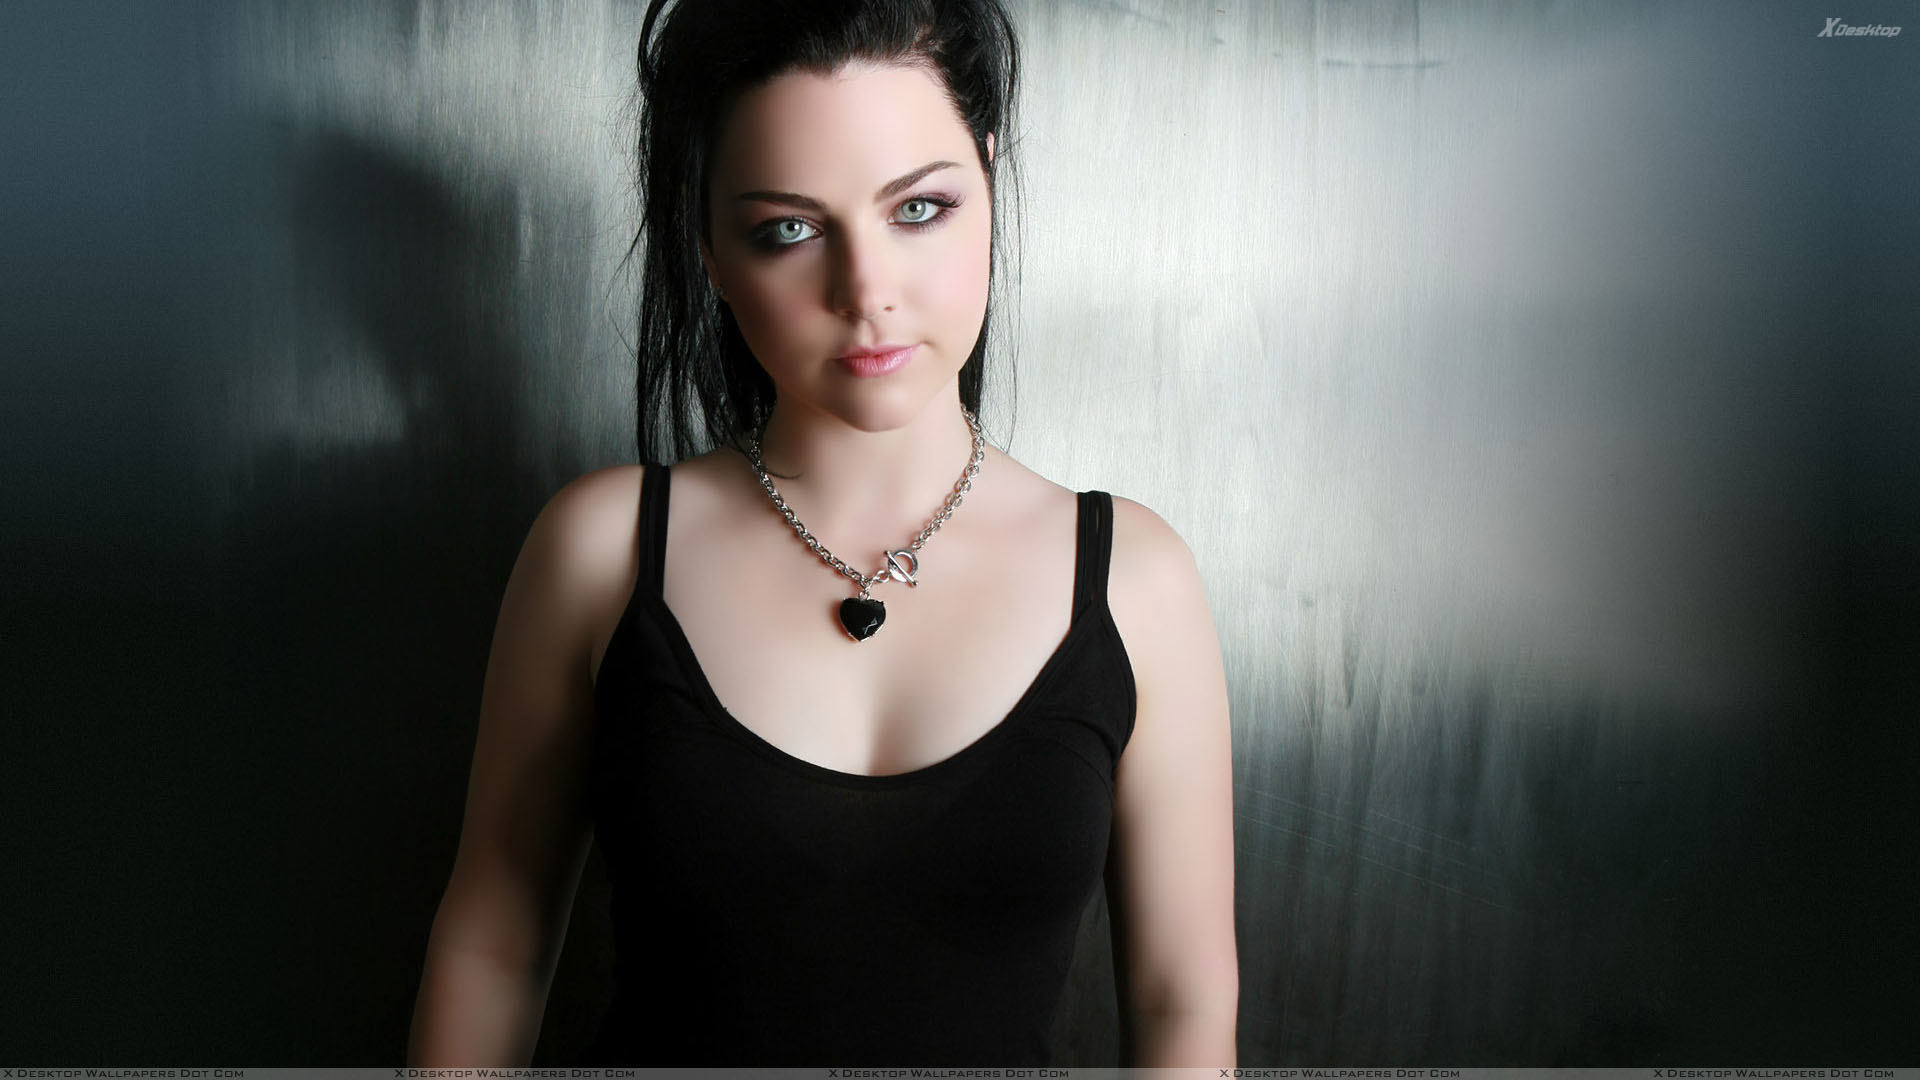 Amy Lee Wallpapers Photos amp Images in HD